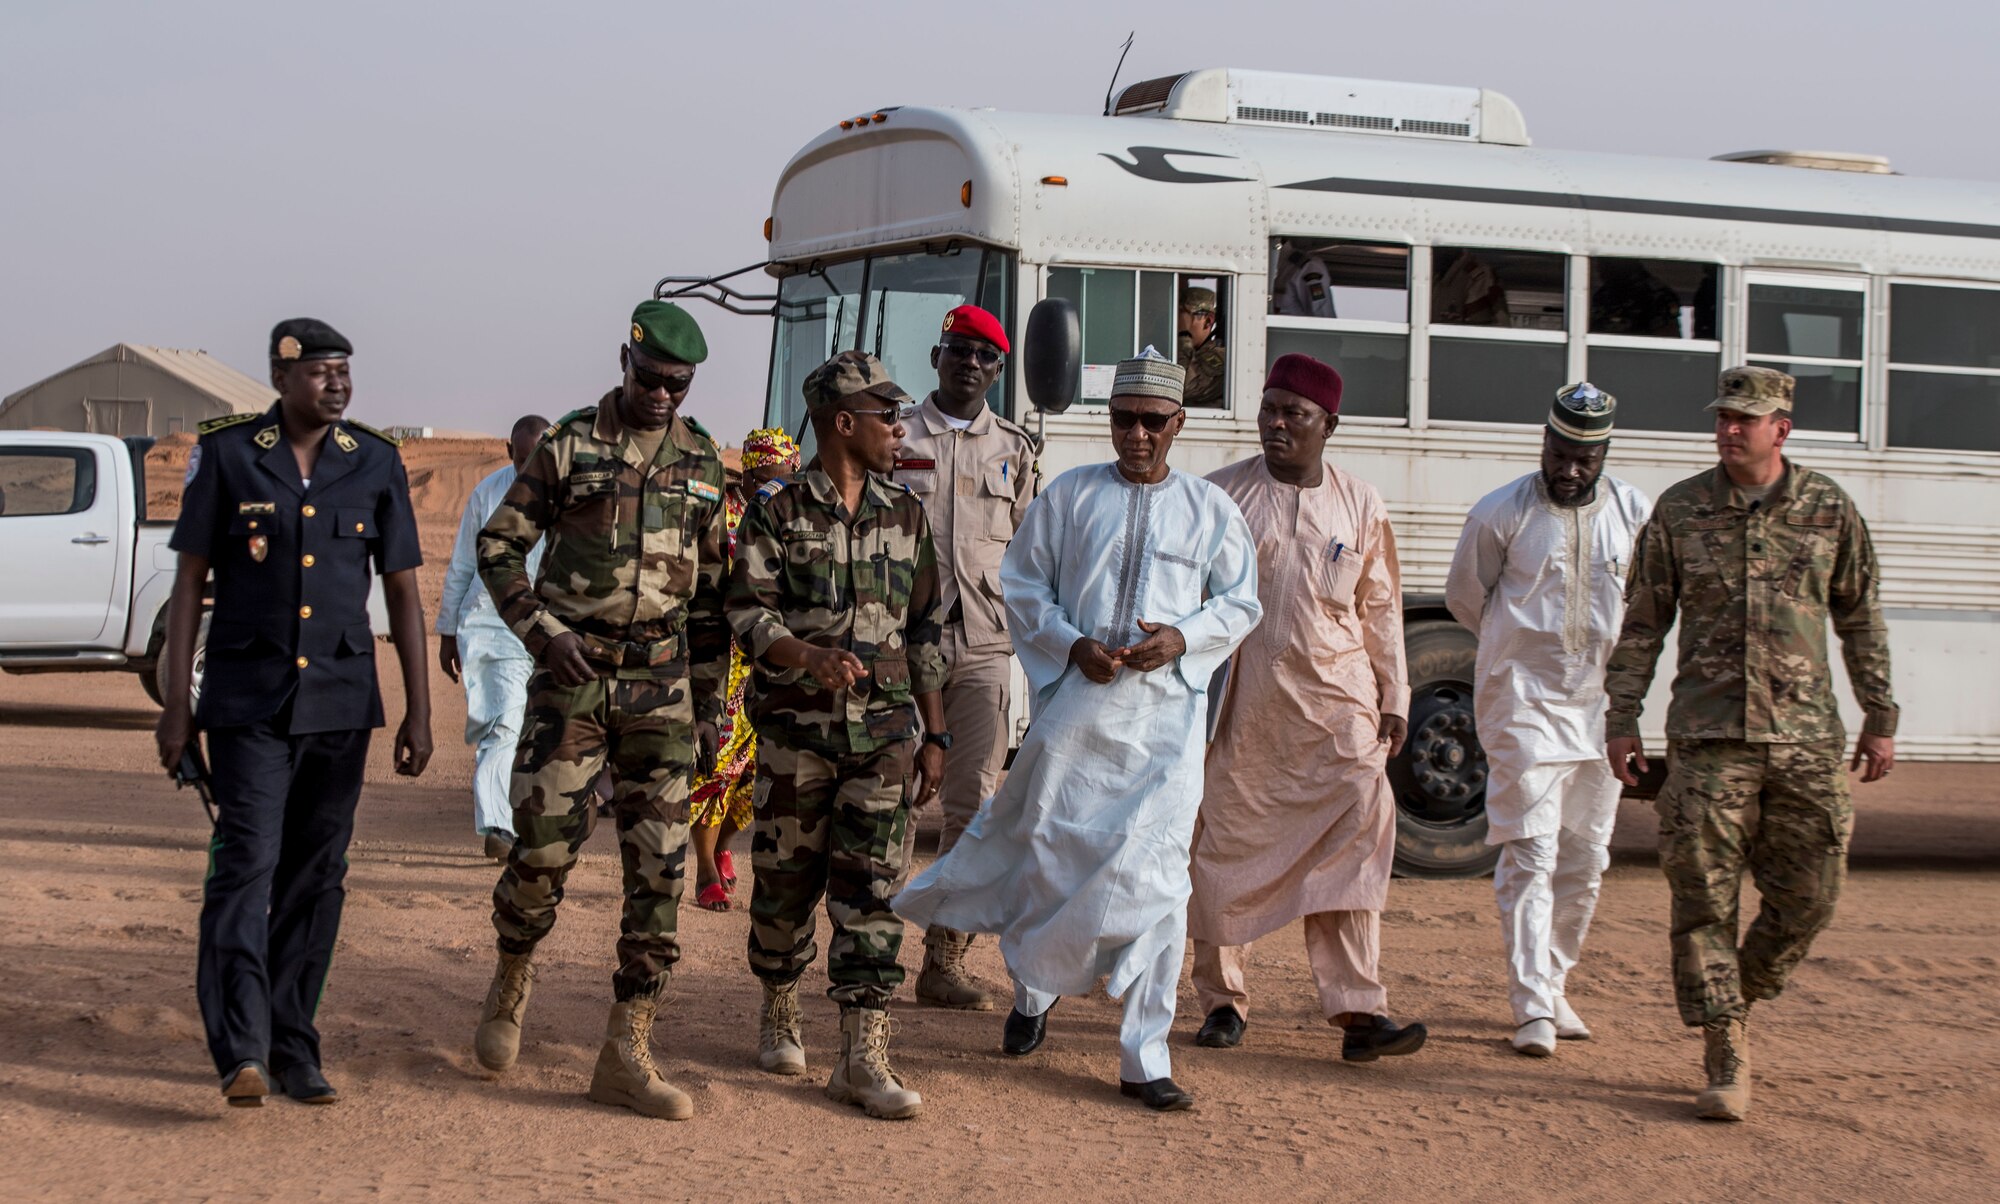 Agadez civic leaders, commanders of the Forces Armées Nigeriennes and U.S. Air Force squadron commanders from the 409th Air Expeditionary Group walk together during a base tour Feb. 21, 2018, at Nigerien Air Base 201, Niger. Sustaining positive relations with their host-nation partners is part of a unique mission that promotes regional stability and prosperity. (U.S. Air Force photo by Tech. Sgt. Nick Wilson)